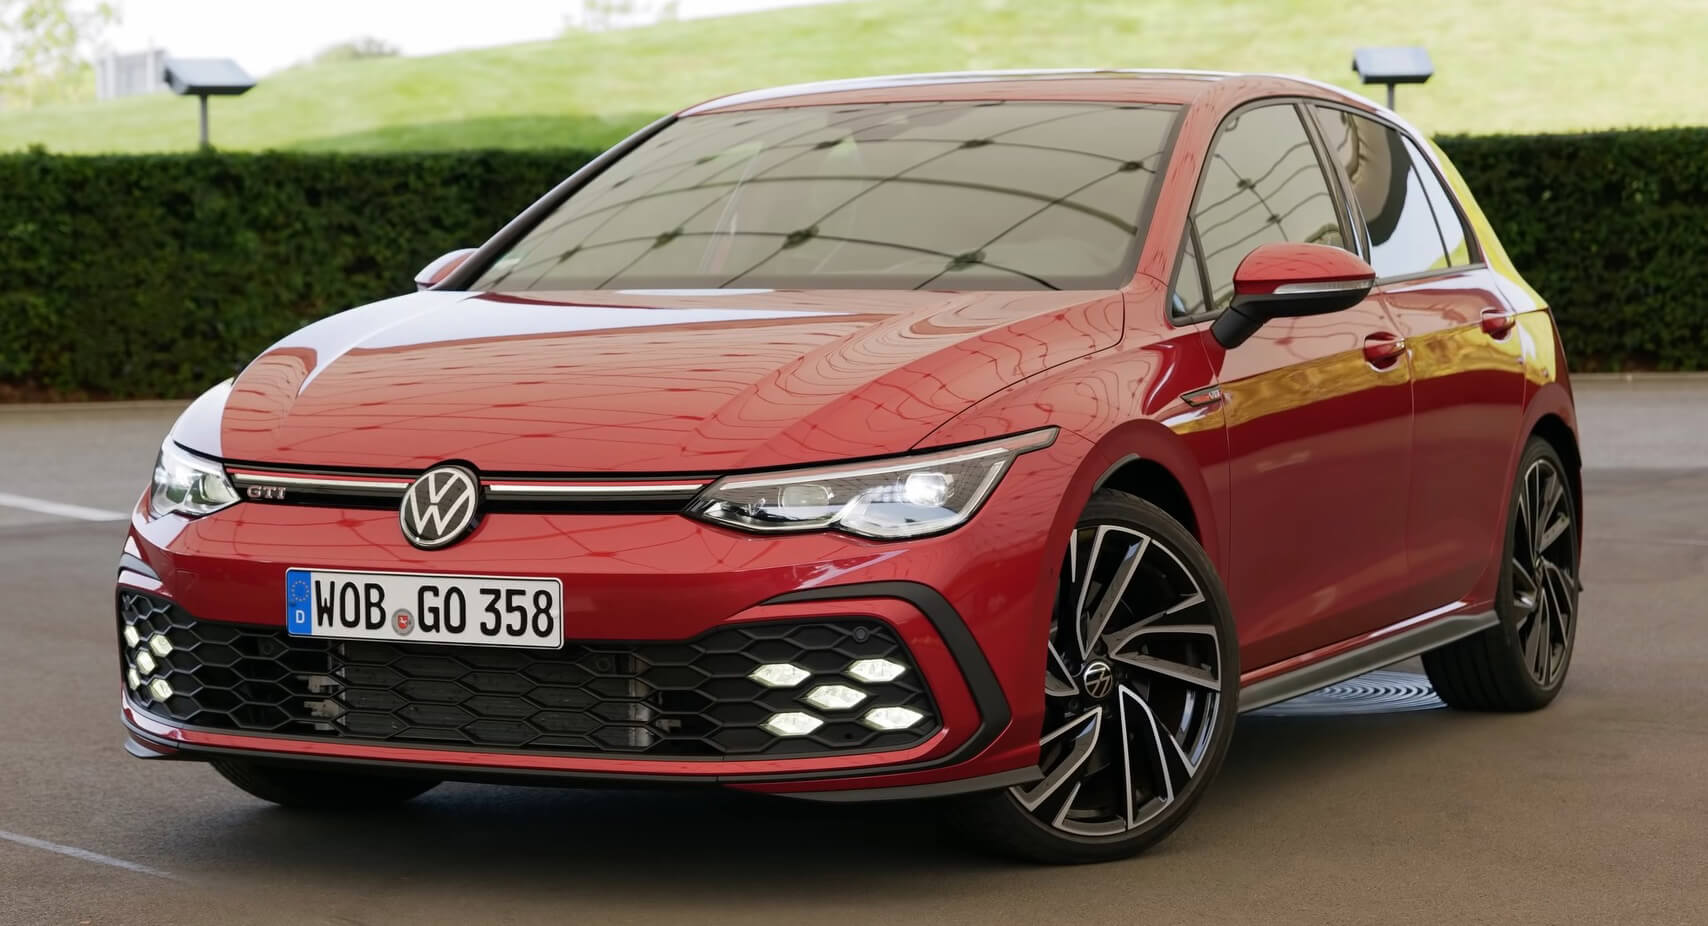 2020 VW Golf Mk8 GTI: Could It Be The Smart Choice In The Hot Hatch Class?